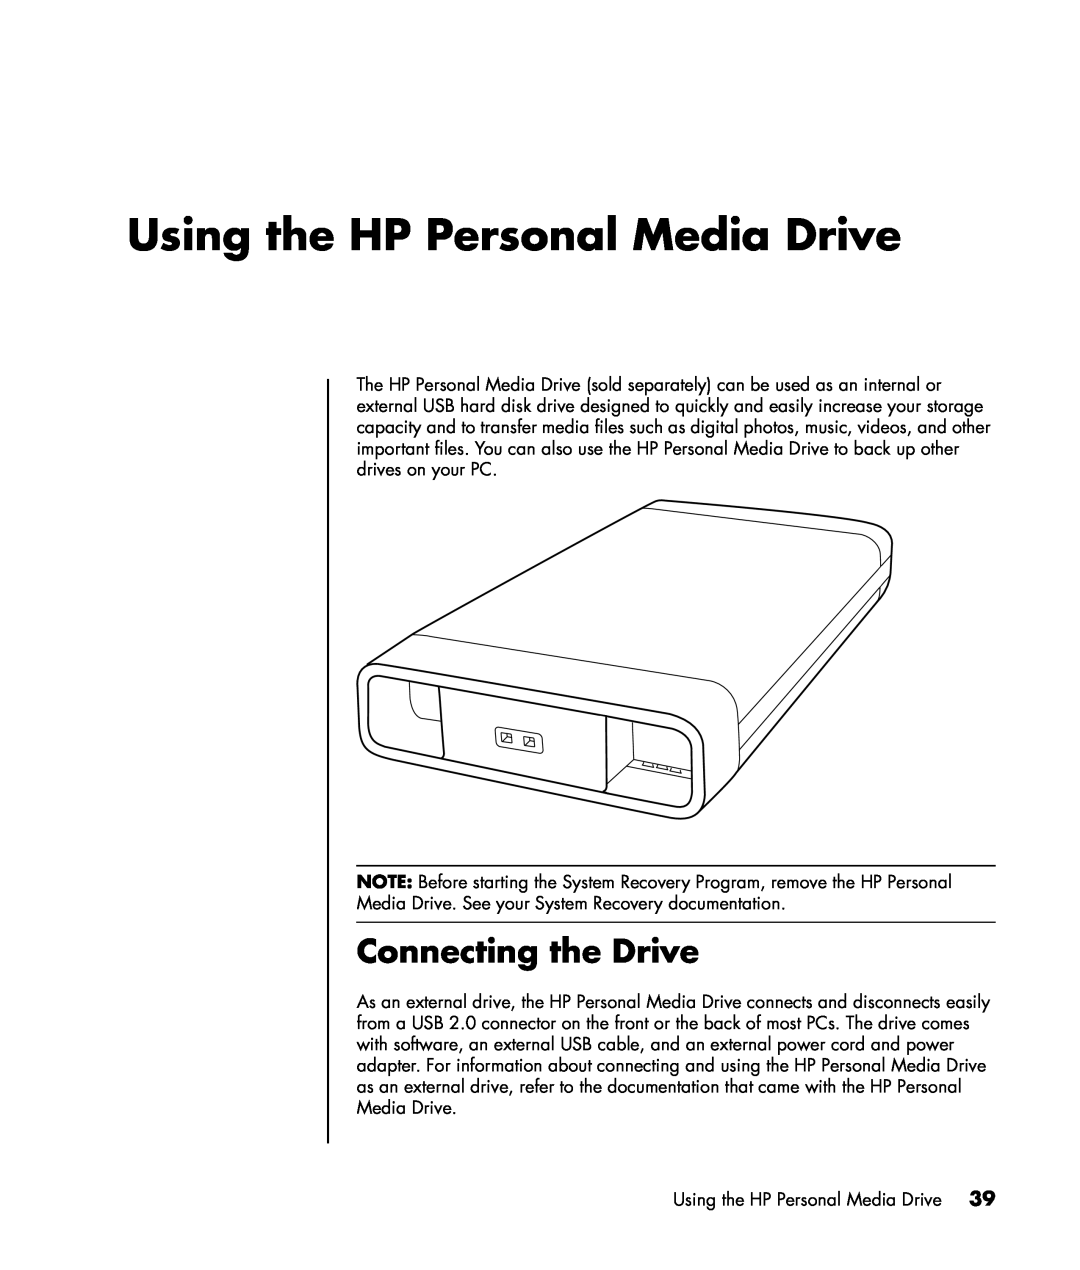 HP a1219h, a1265w, a1260a, a1257c, a1245c, a1240n, a1230n, a1224n, a1226n Using the HP Personal Media Drive, Connecting the Drive 